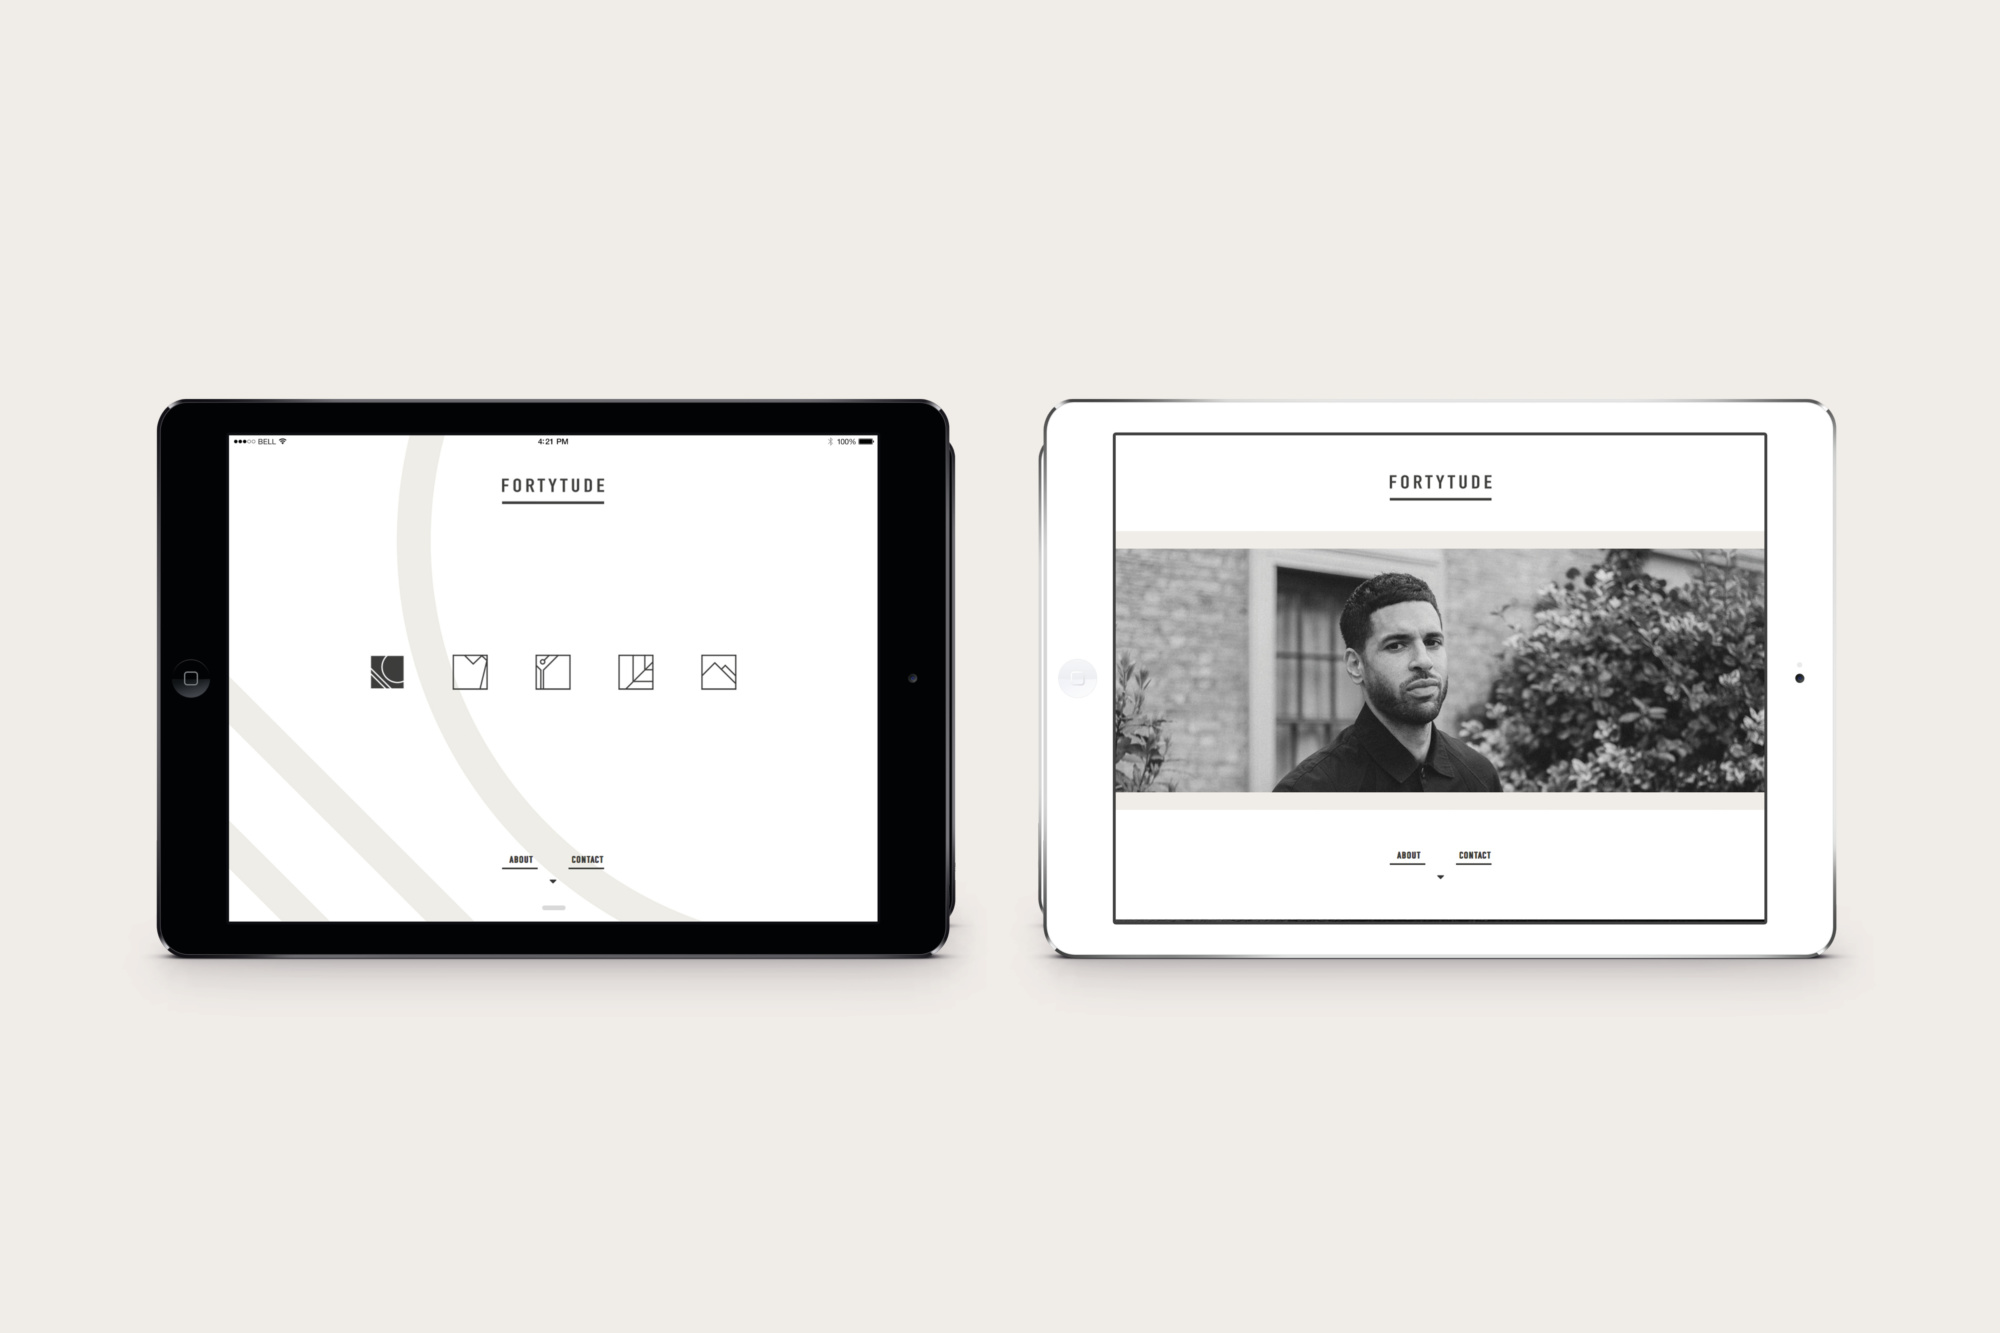 Fortytude website displayed on an iPad. Monochrome design, with simple line graphics. Graphic design produced by Barefaced Studios, design agency based in Islington, North London.